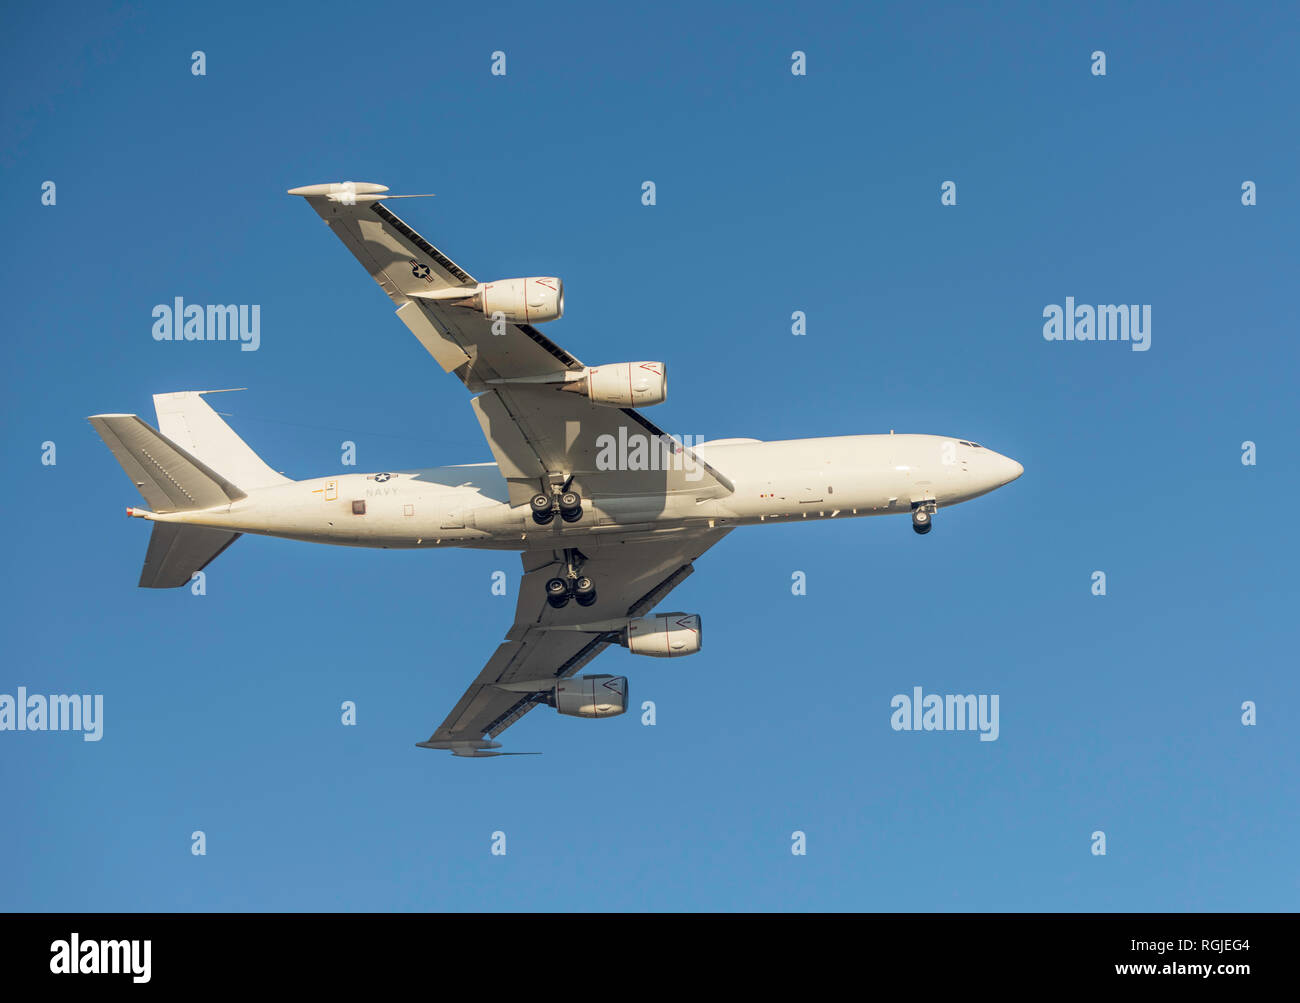 BOSSIER CITY, LA., U.S.A. - AUG. 21, 2018: A U.S. Navy Boeing E-6 Mercury command and control aircraft flies over the city near Barksdale Air Force Ba Stock Photo